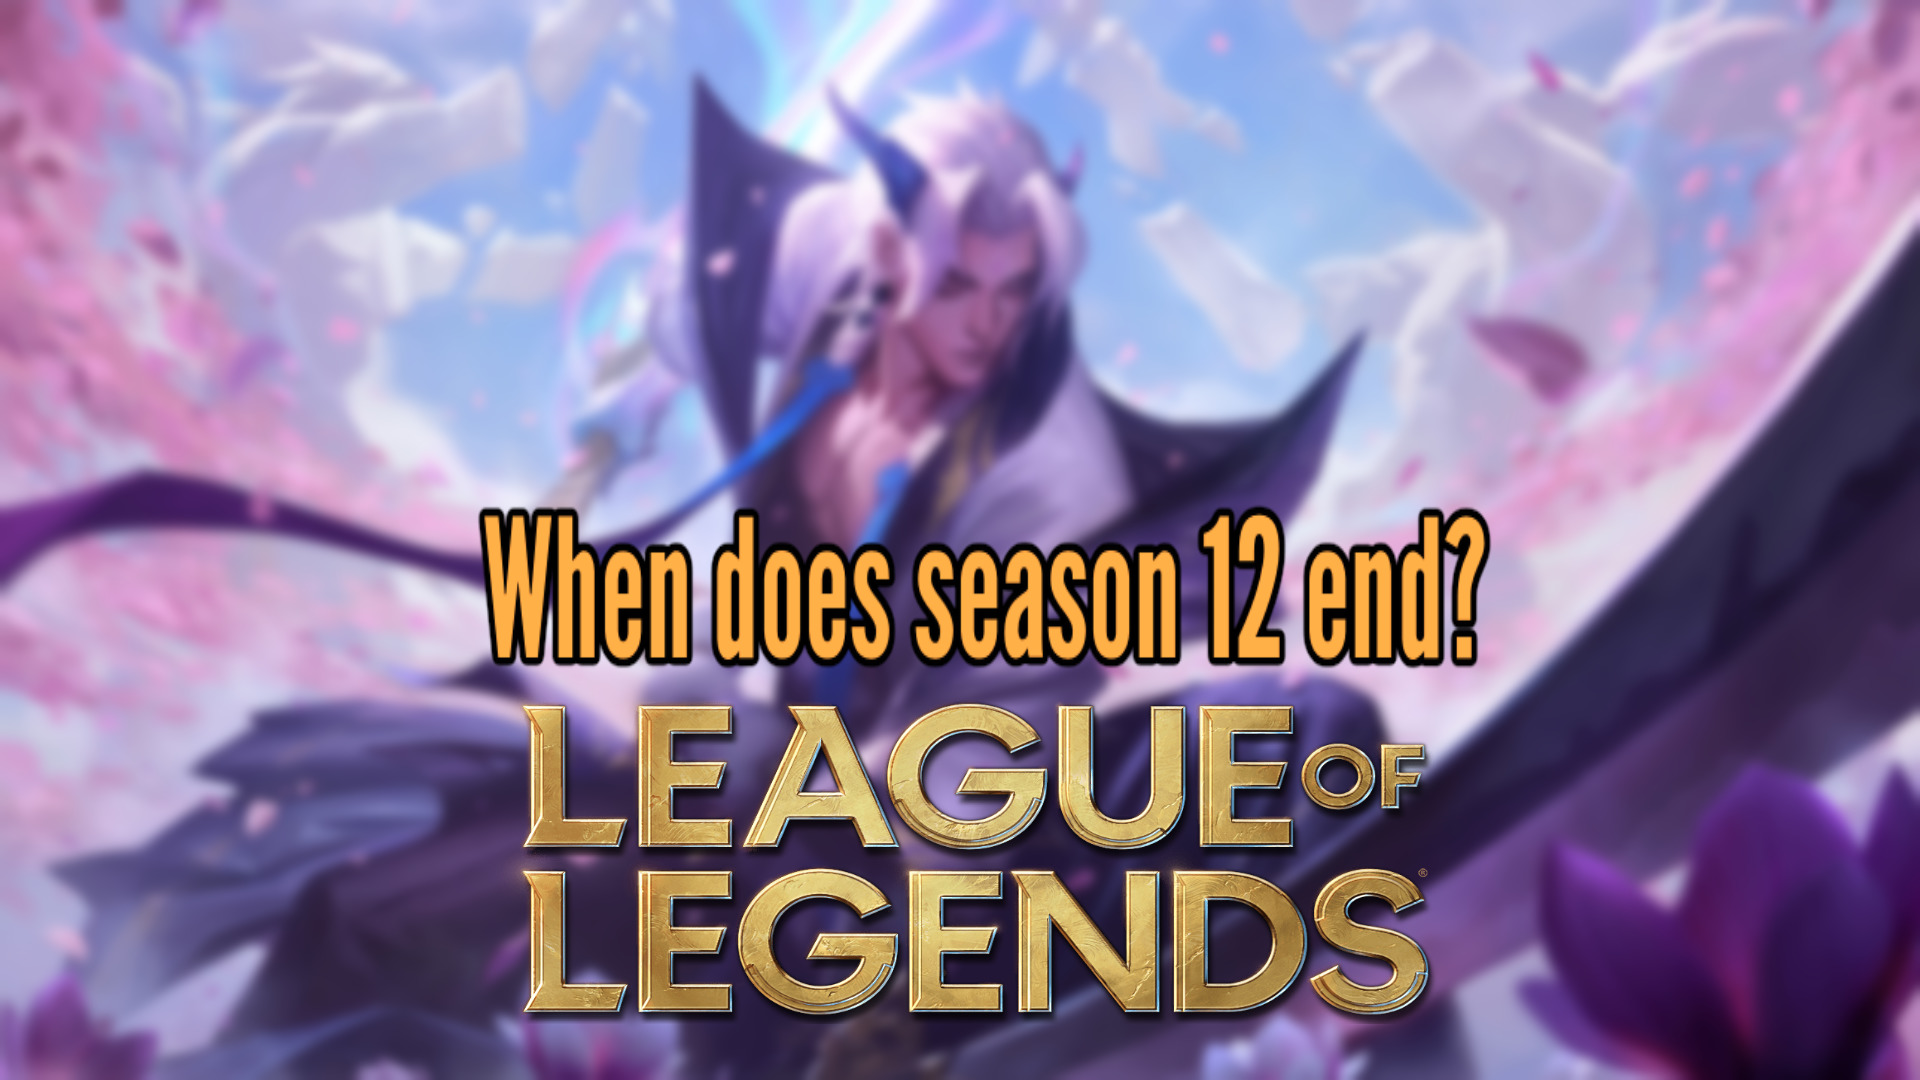 League of Legends Ranked season 2023: Start time for every major